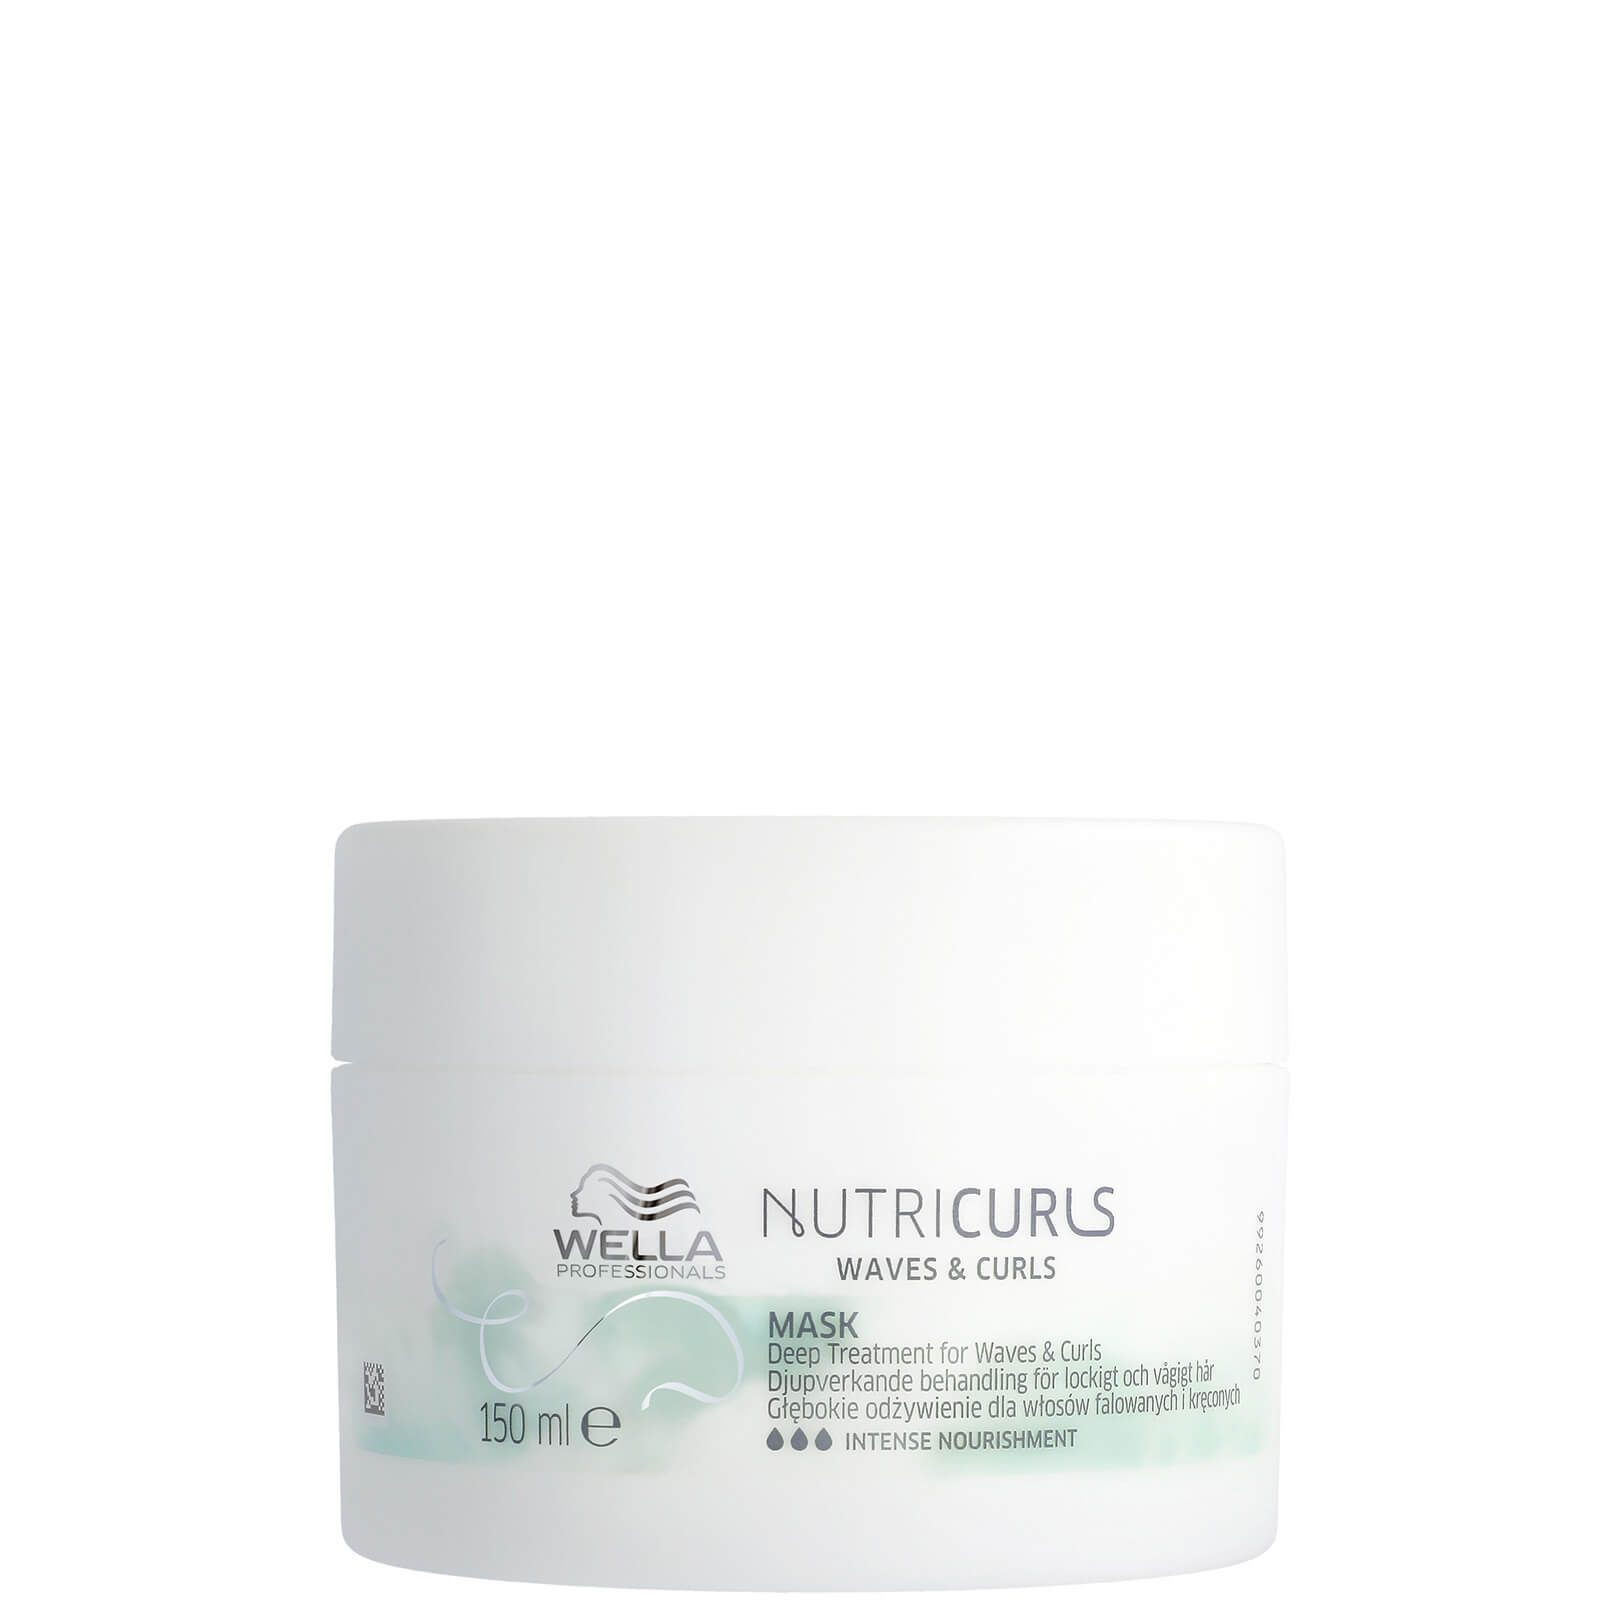 Image of Wella Professionals Nutricurls Mask for Waves and Curls 150ml